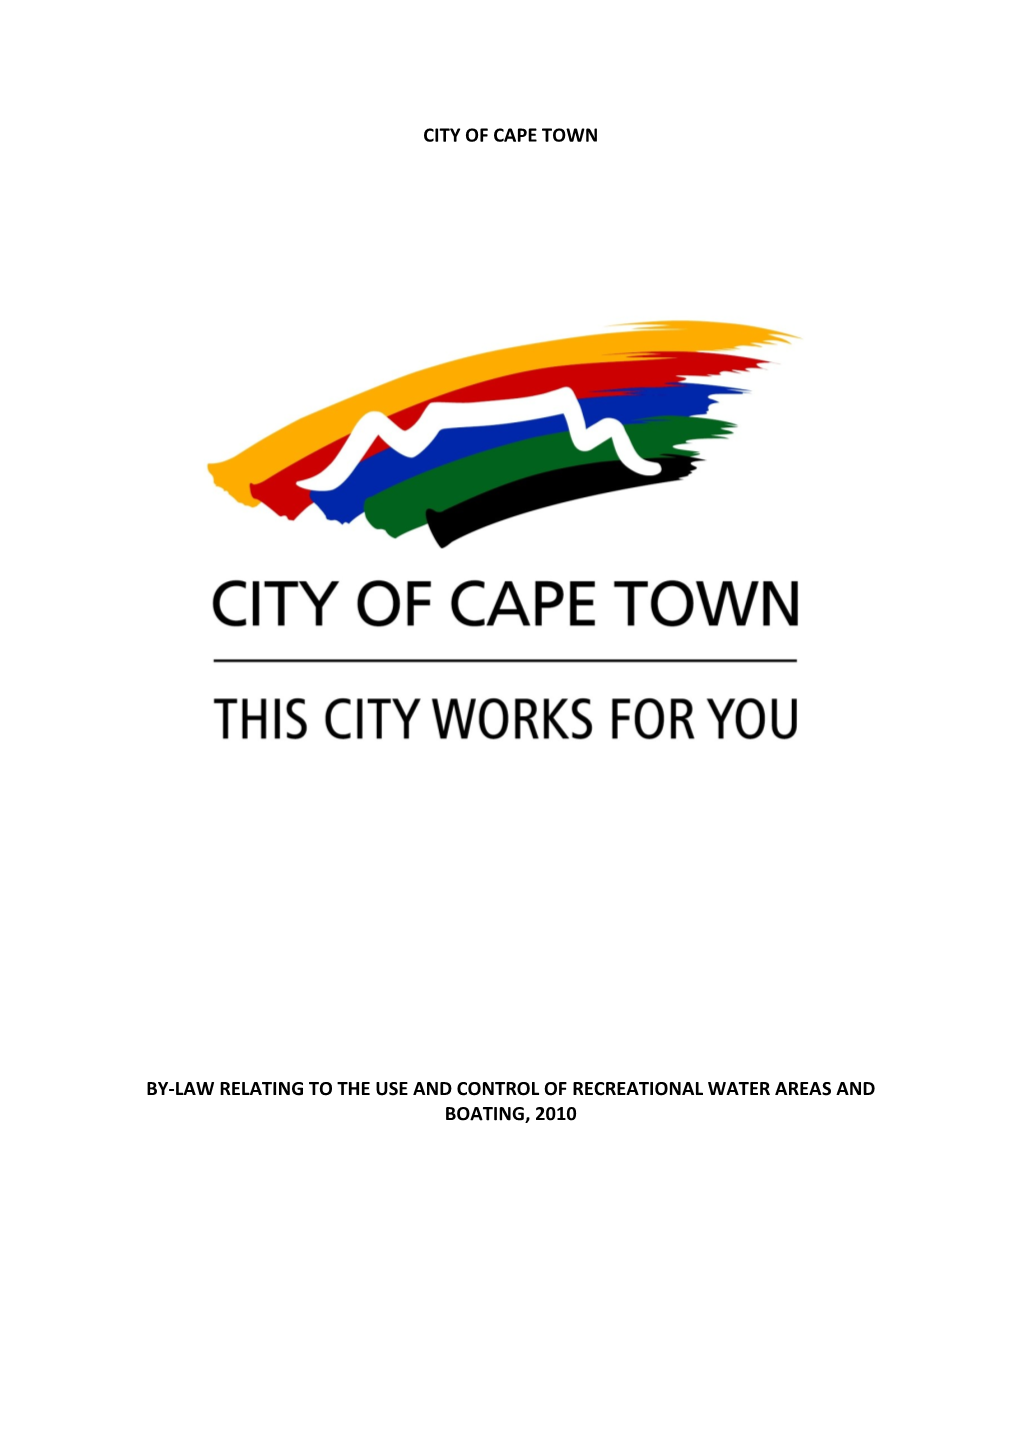 City of Cape Town By-Law Relating to the Use and Control of Recreational Water Areas and Boating, 2010